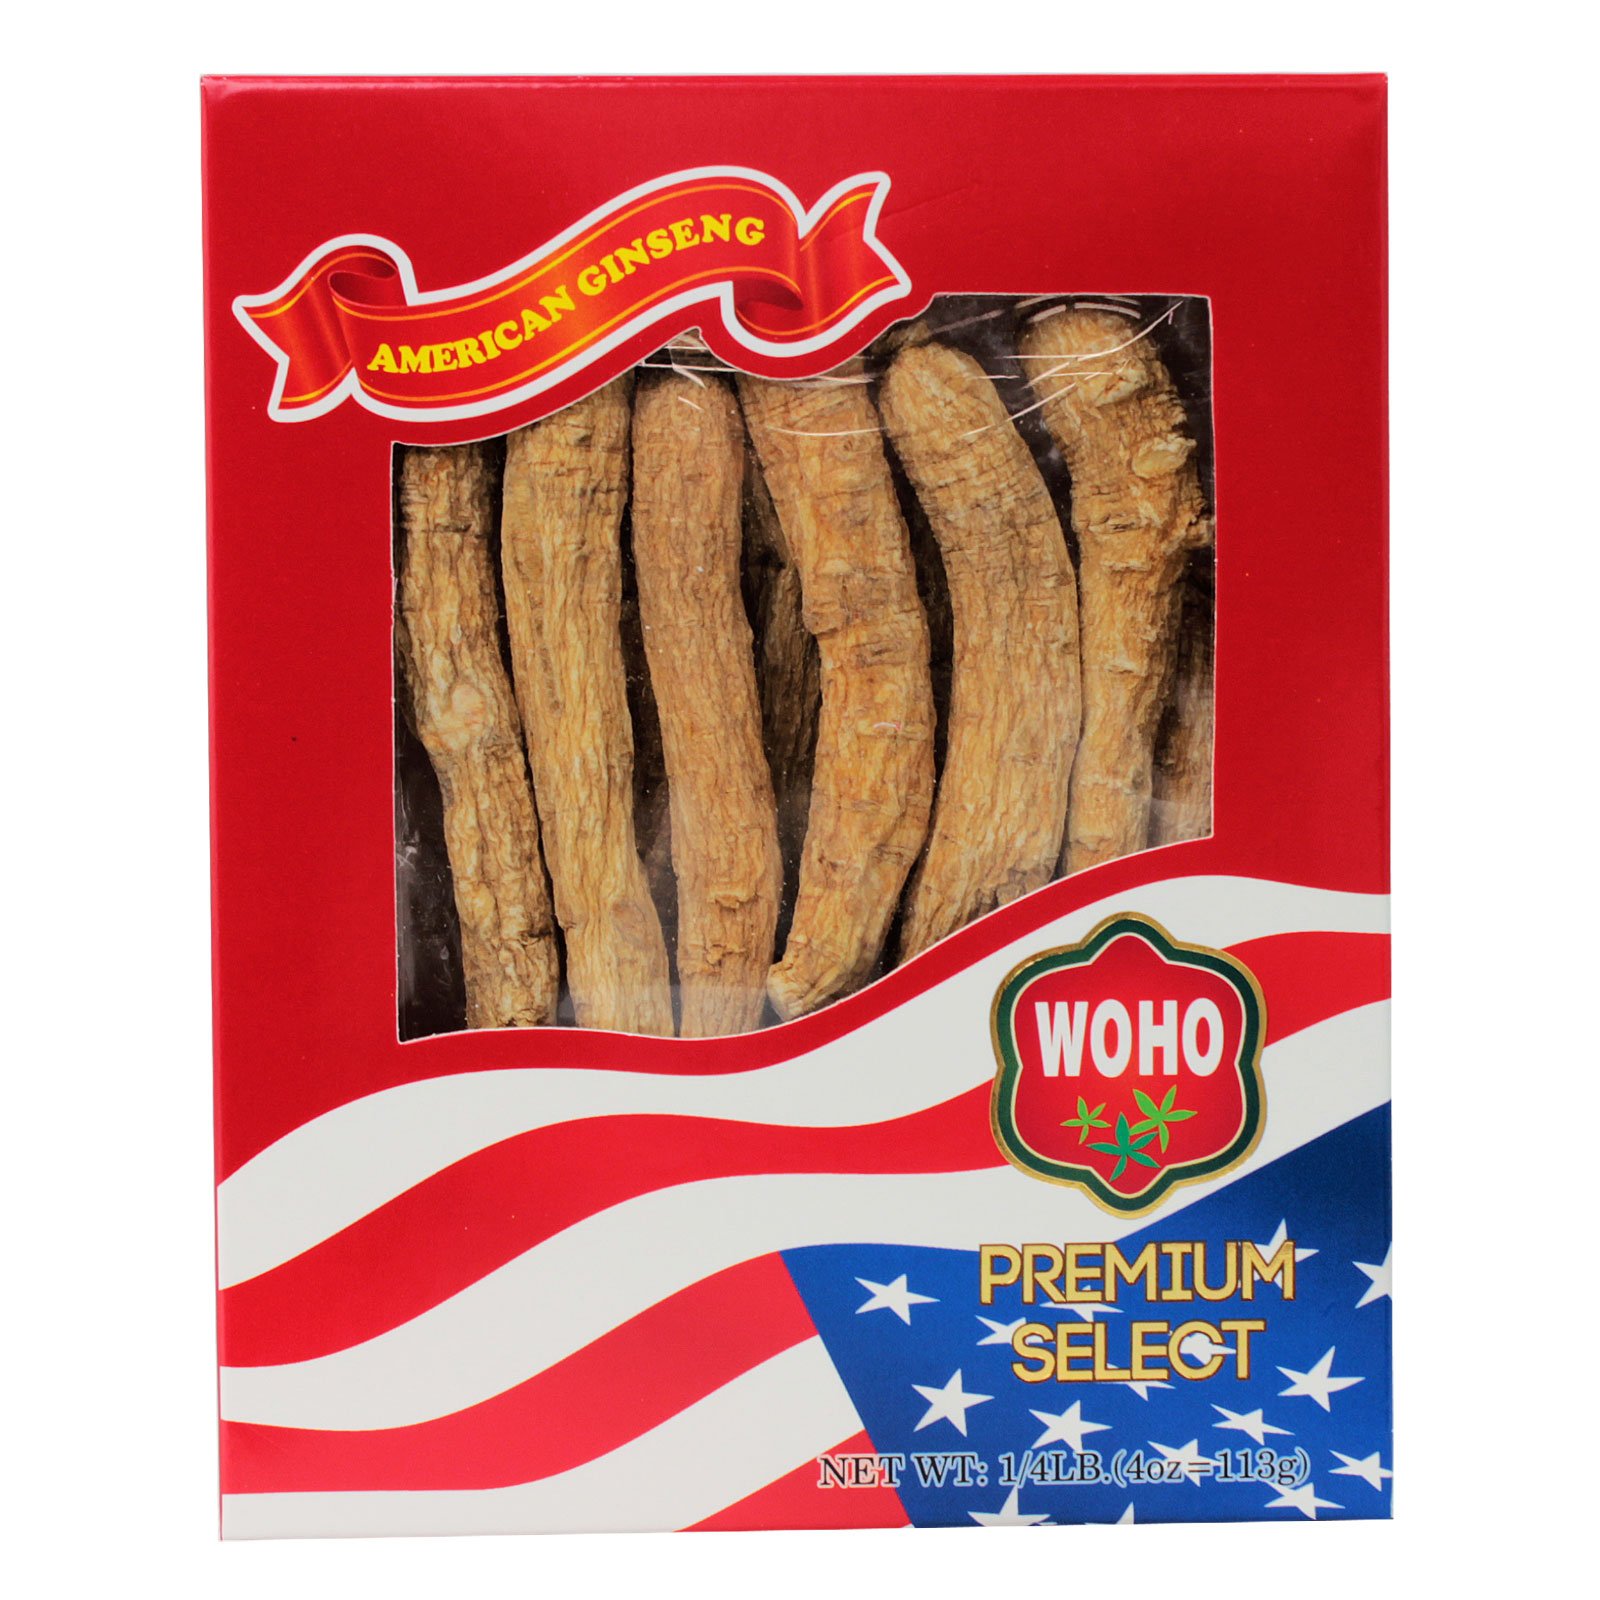 WOHO American Ginseng 100.4, Long Large XL Cultivated Roots 4oz by Woohoo Natural